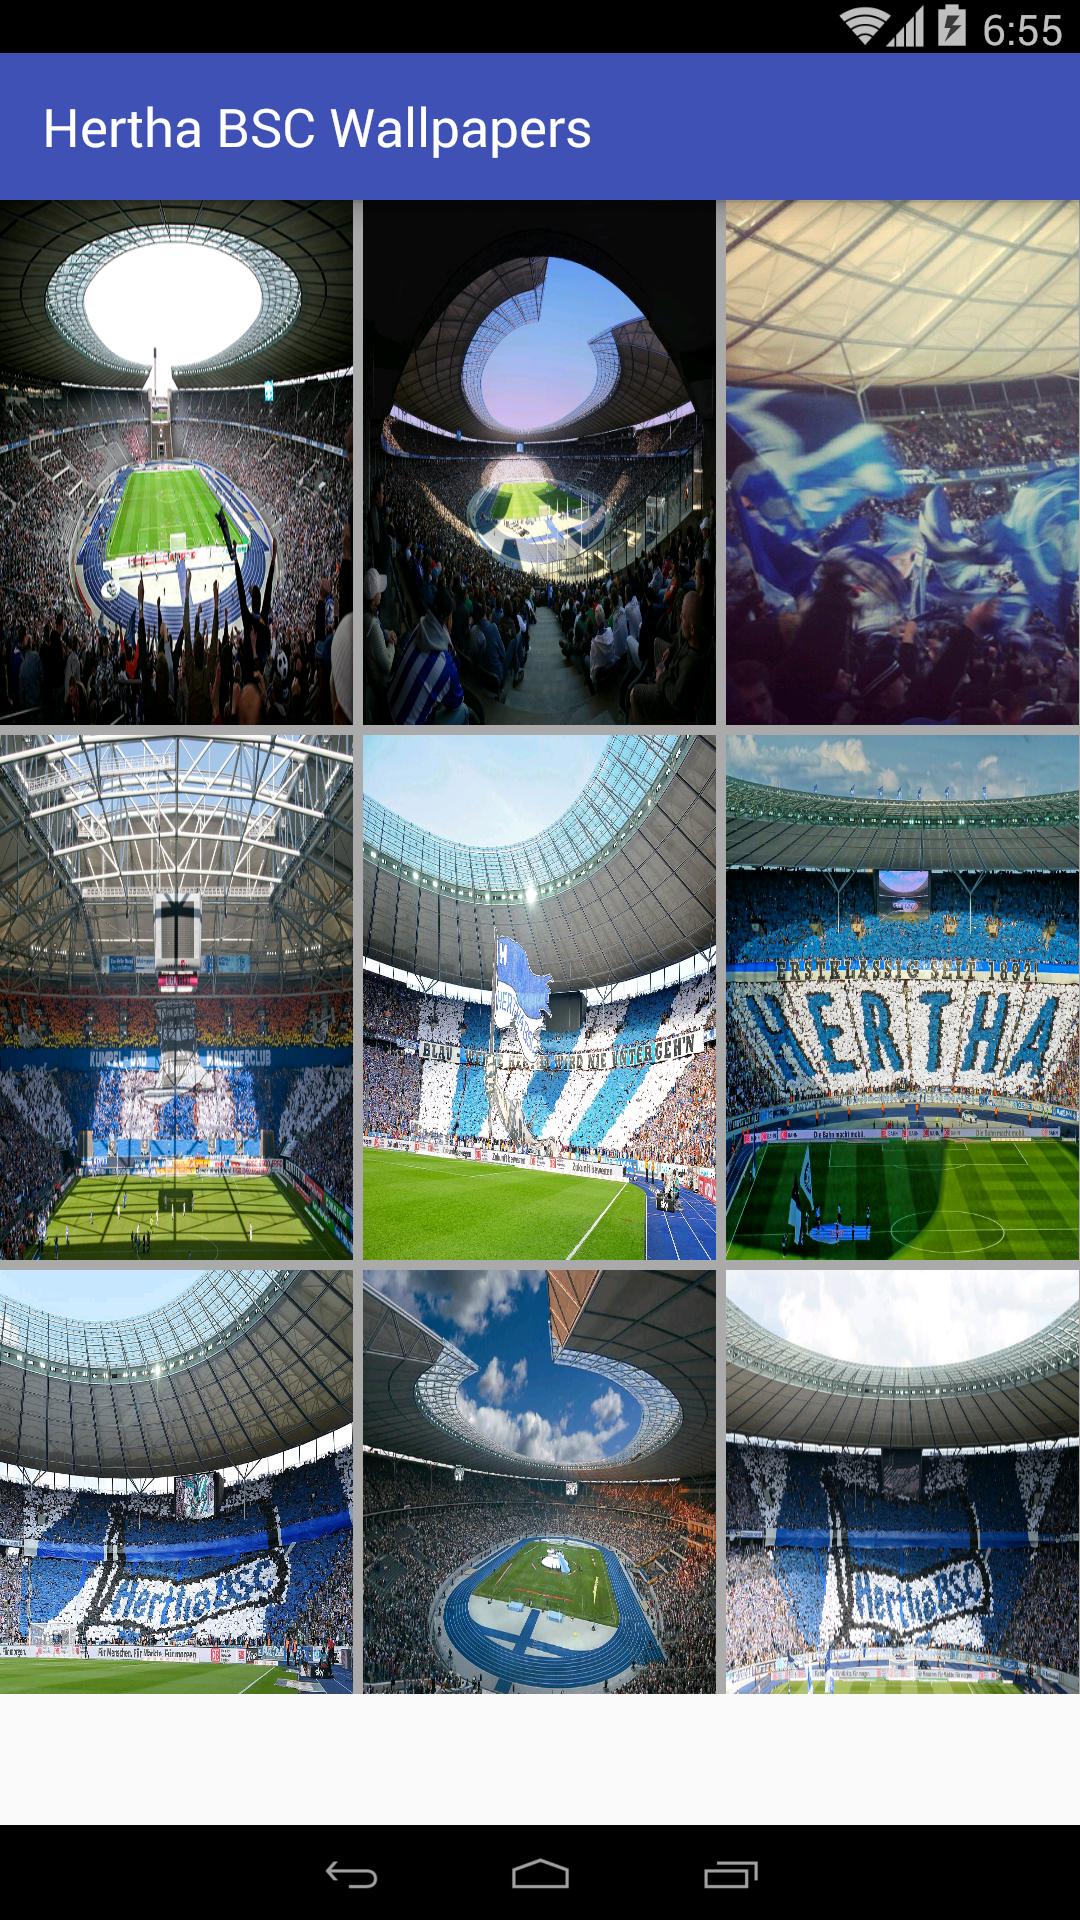 Hertha BSC Wallpaper Logo for Android - APK Download